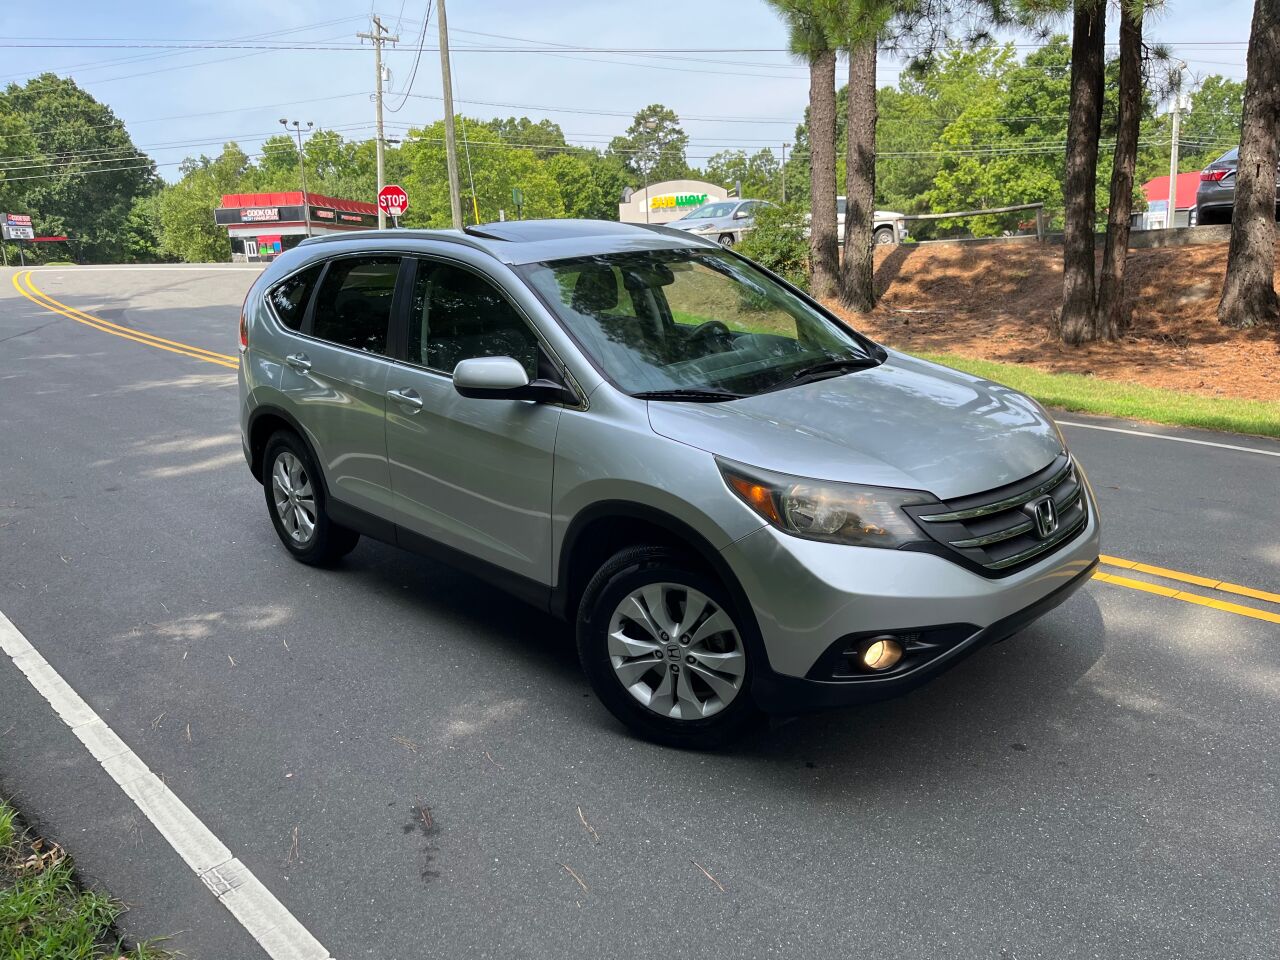 Preowned 2014 HONDA CR-V EX-L FWD for sale by The Auto Finders Car Dealership of Durham in Durham, NC